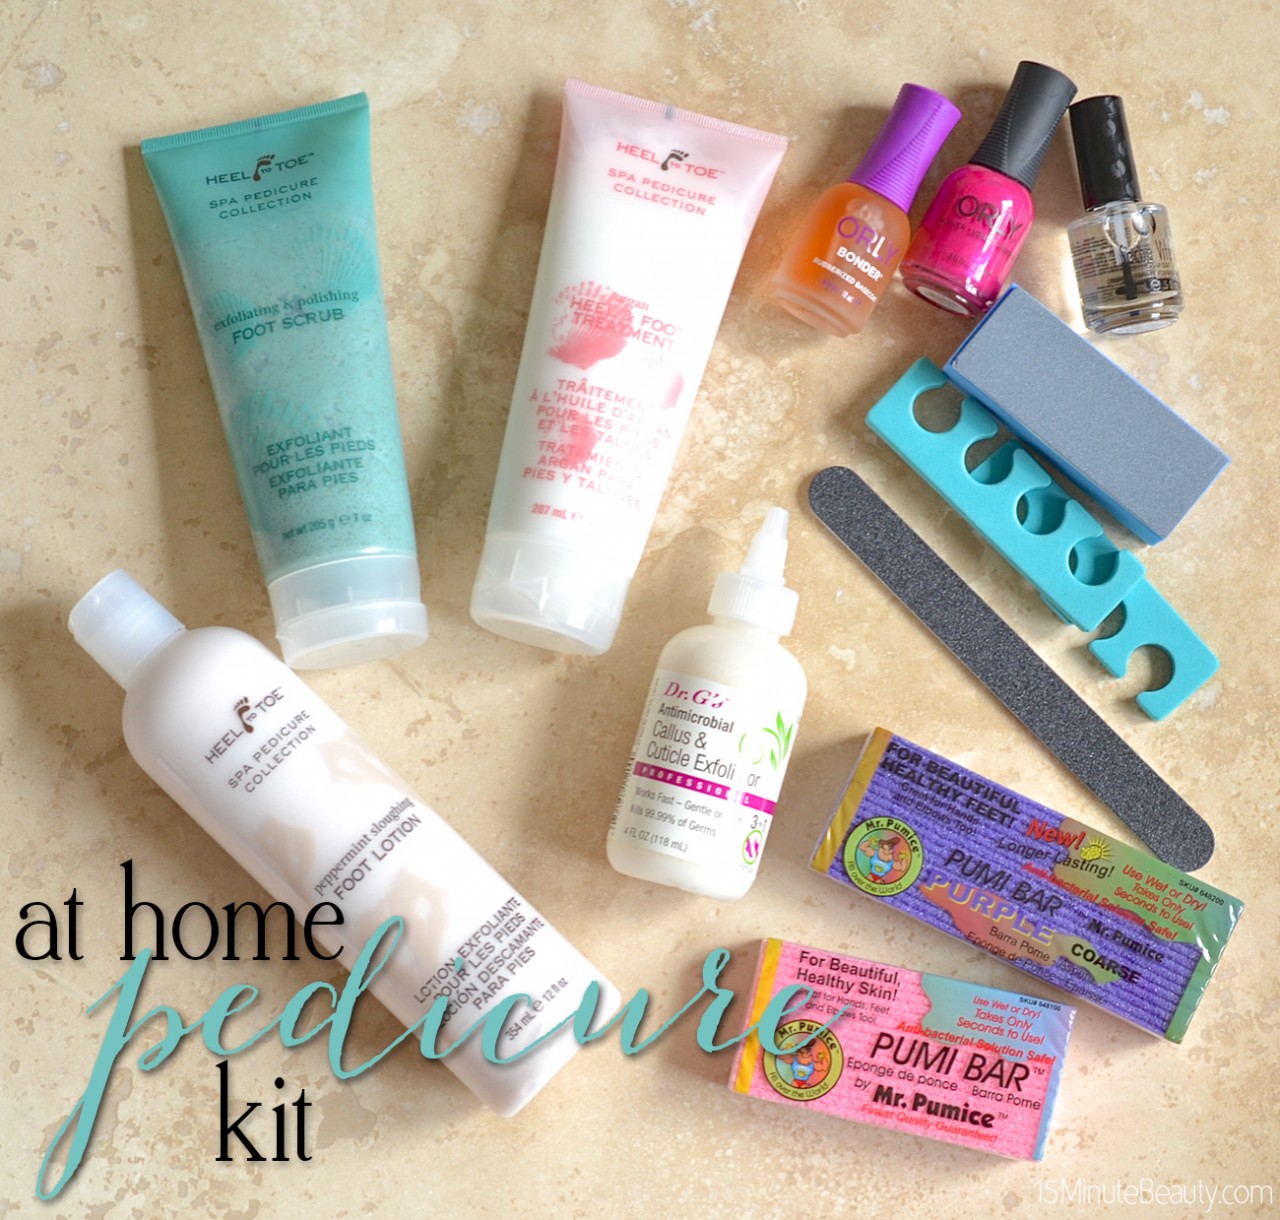 At Home DIY Pedicure Kit: Everything You Need via @15minbeauty